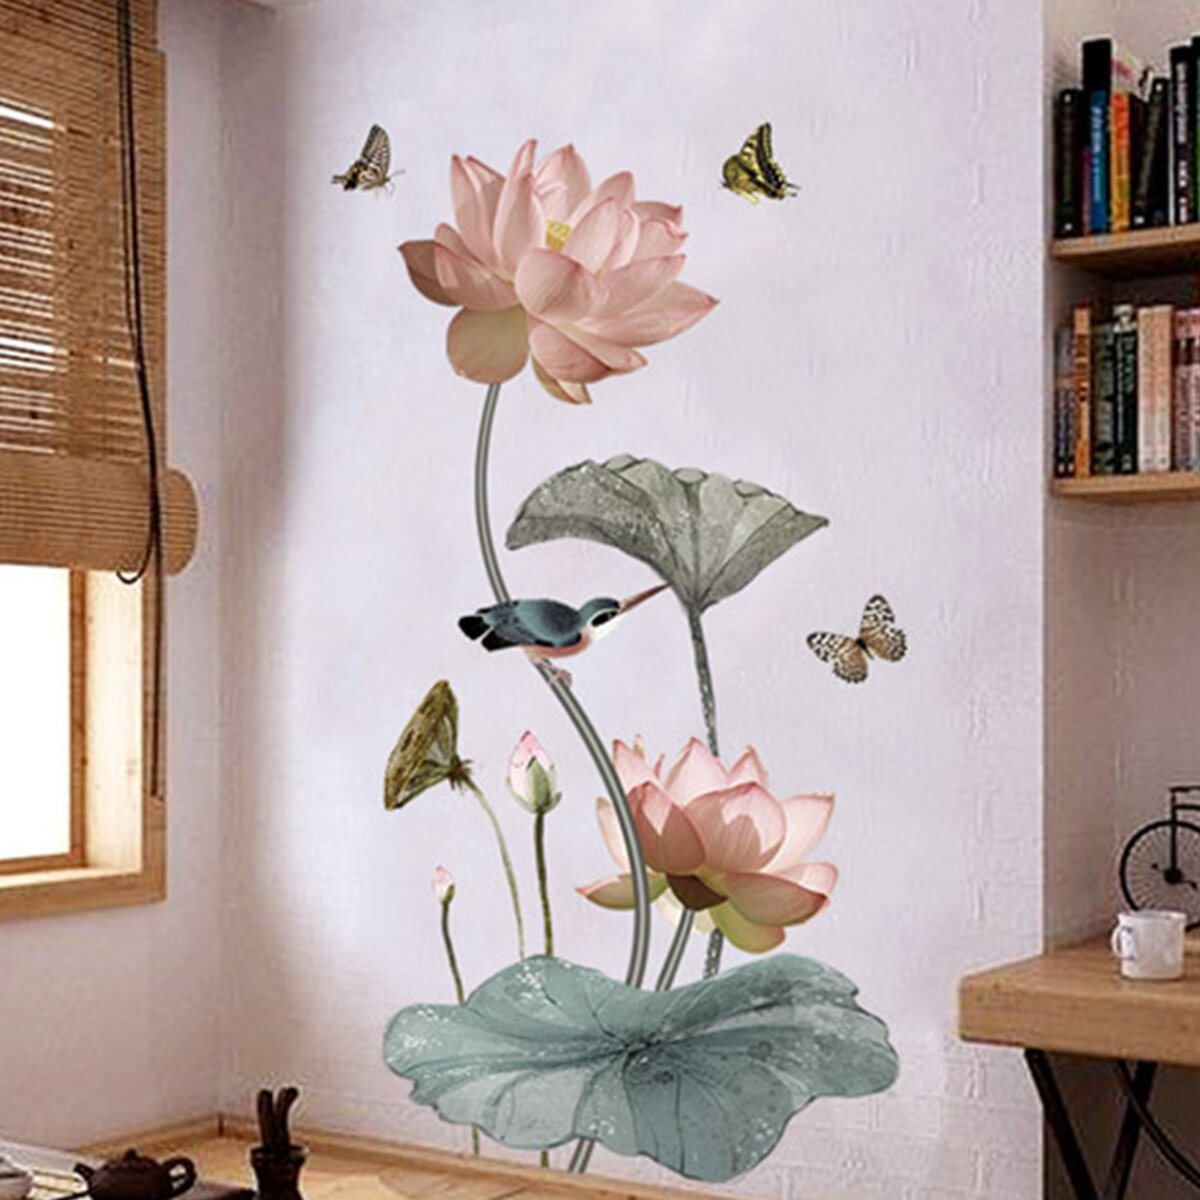 DIY Water Lilies Flower Chinese Calligraphy Wall Stickers Decal Home Decor Art Mural Decals Decor Re